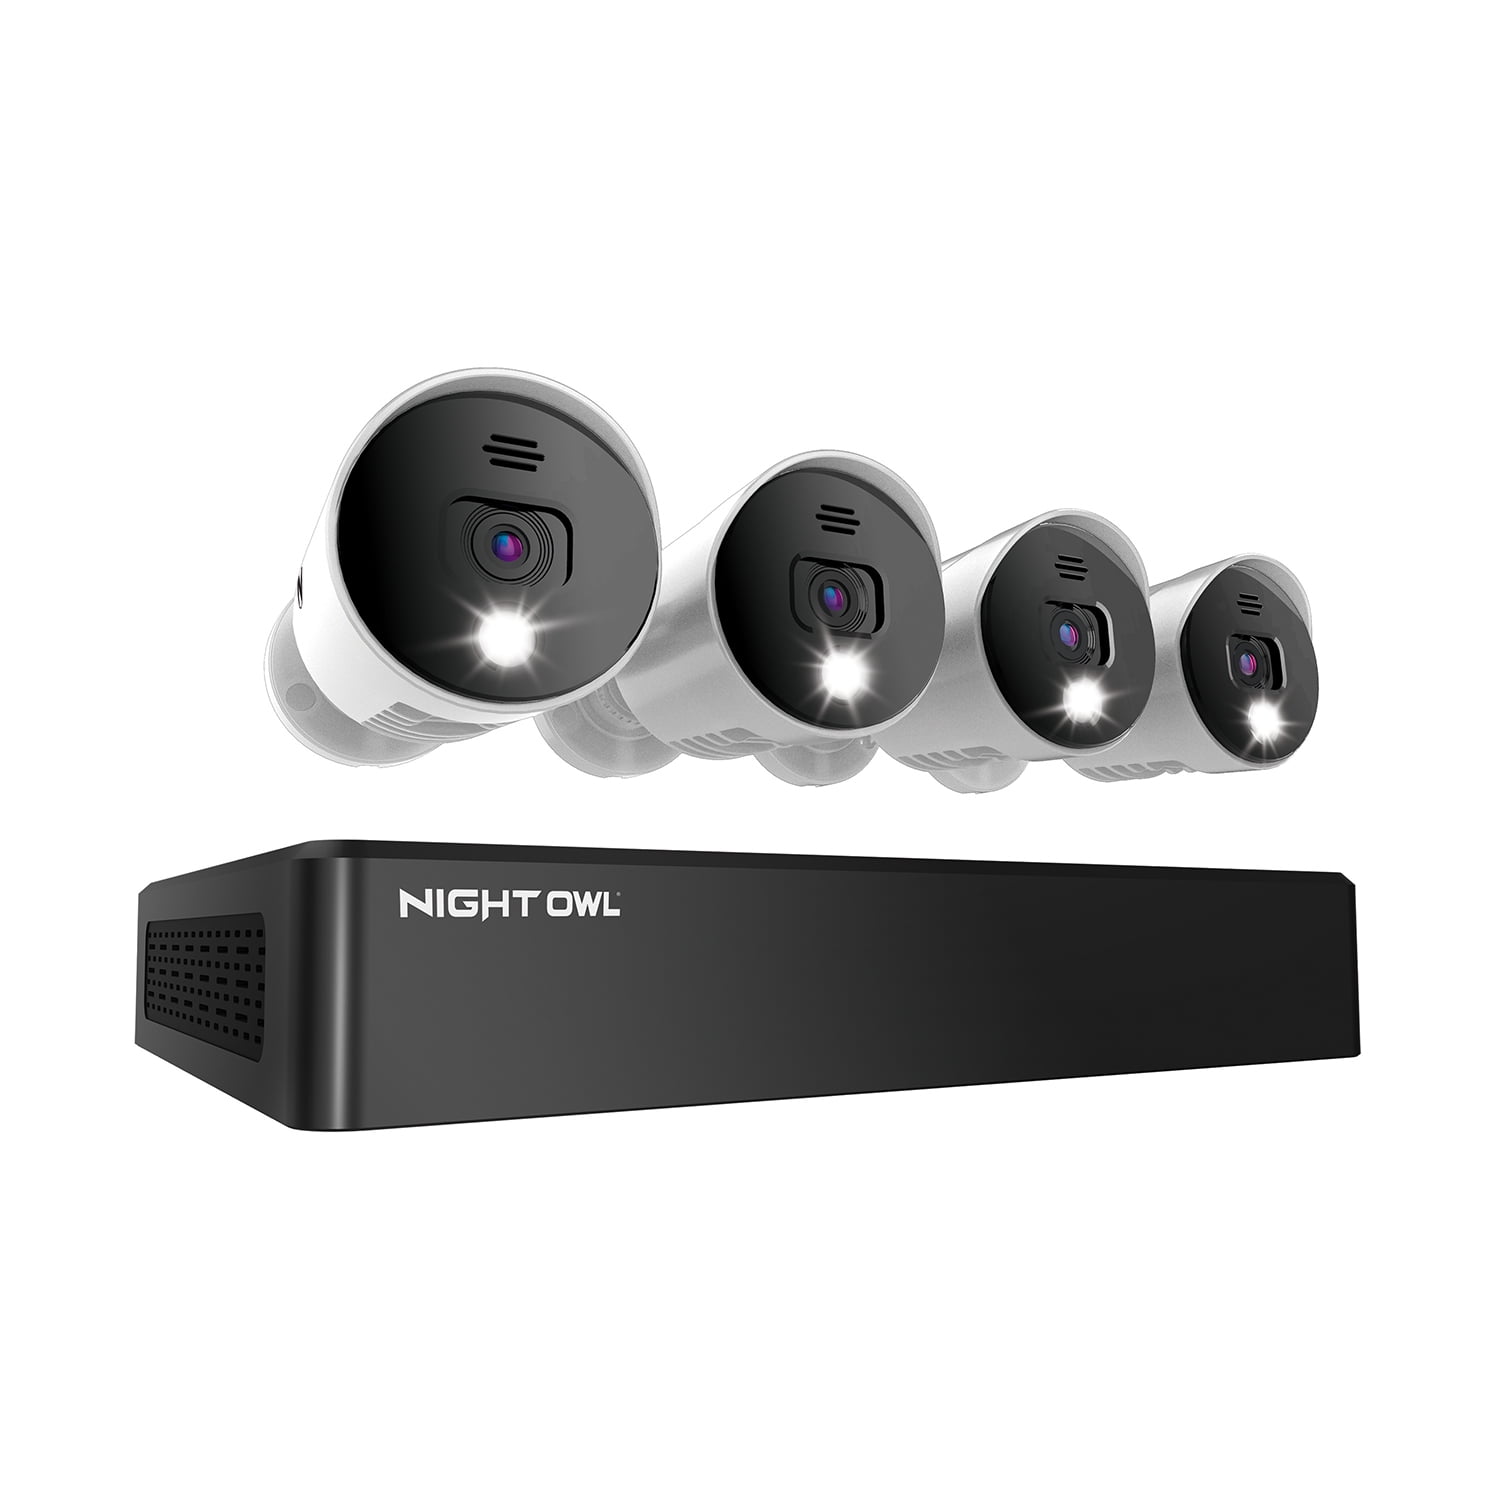 Expandable up to a Total of 12 Wired Cameras Night Owl CCTV Video Home Security Camera System with 8 Wired 4K Ultra HD Indoor/Outdoor Cameras with Night Vision and 2TB Hard Drive 